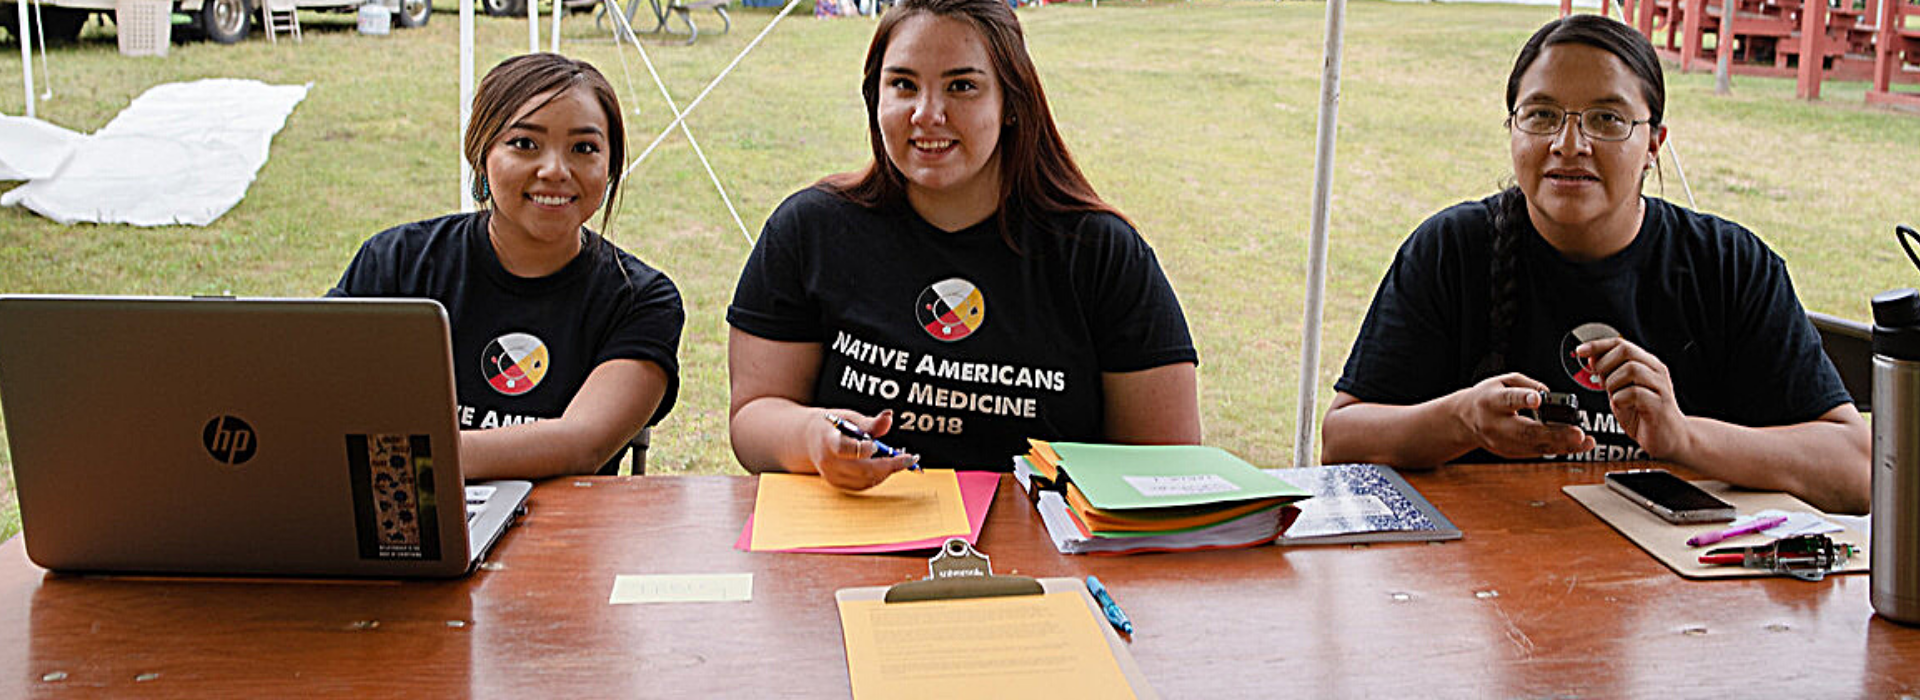 Early Pathways: ‘Native Americans Into Medicine’ Inspires Future Careers in Tribal Health